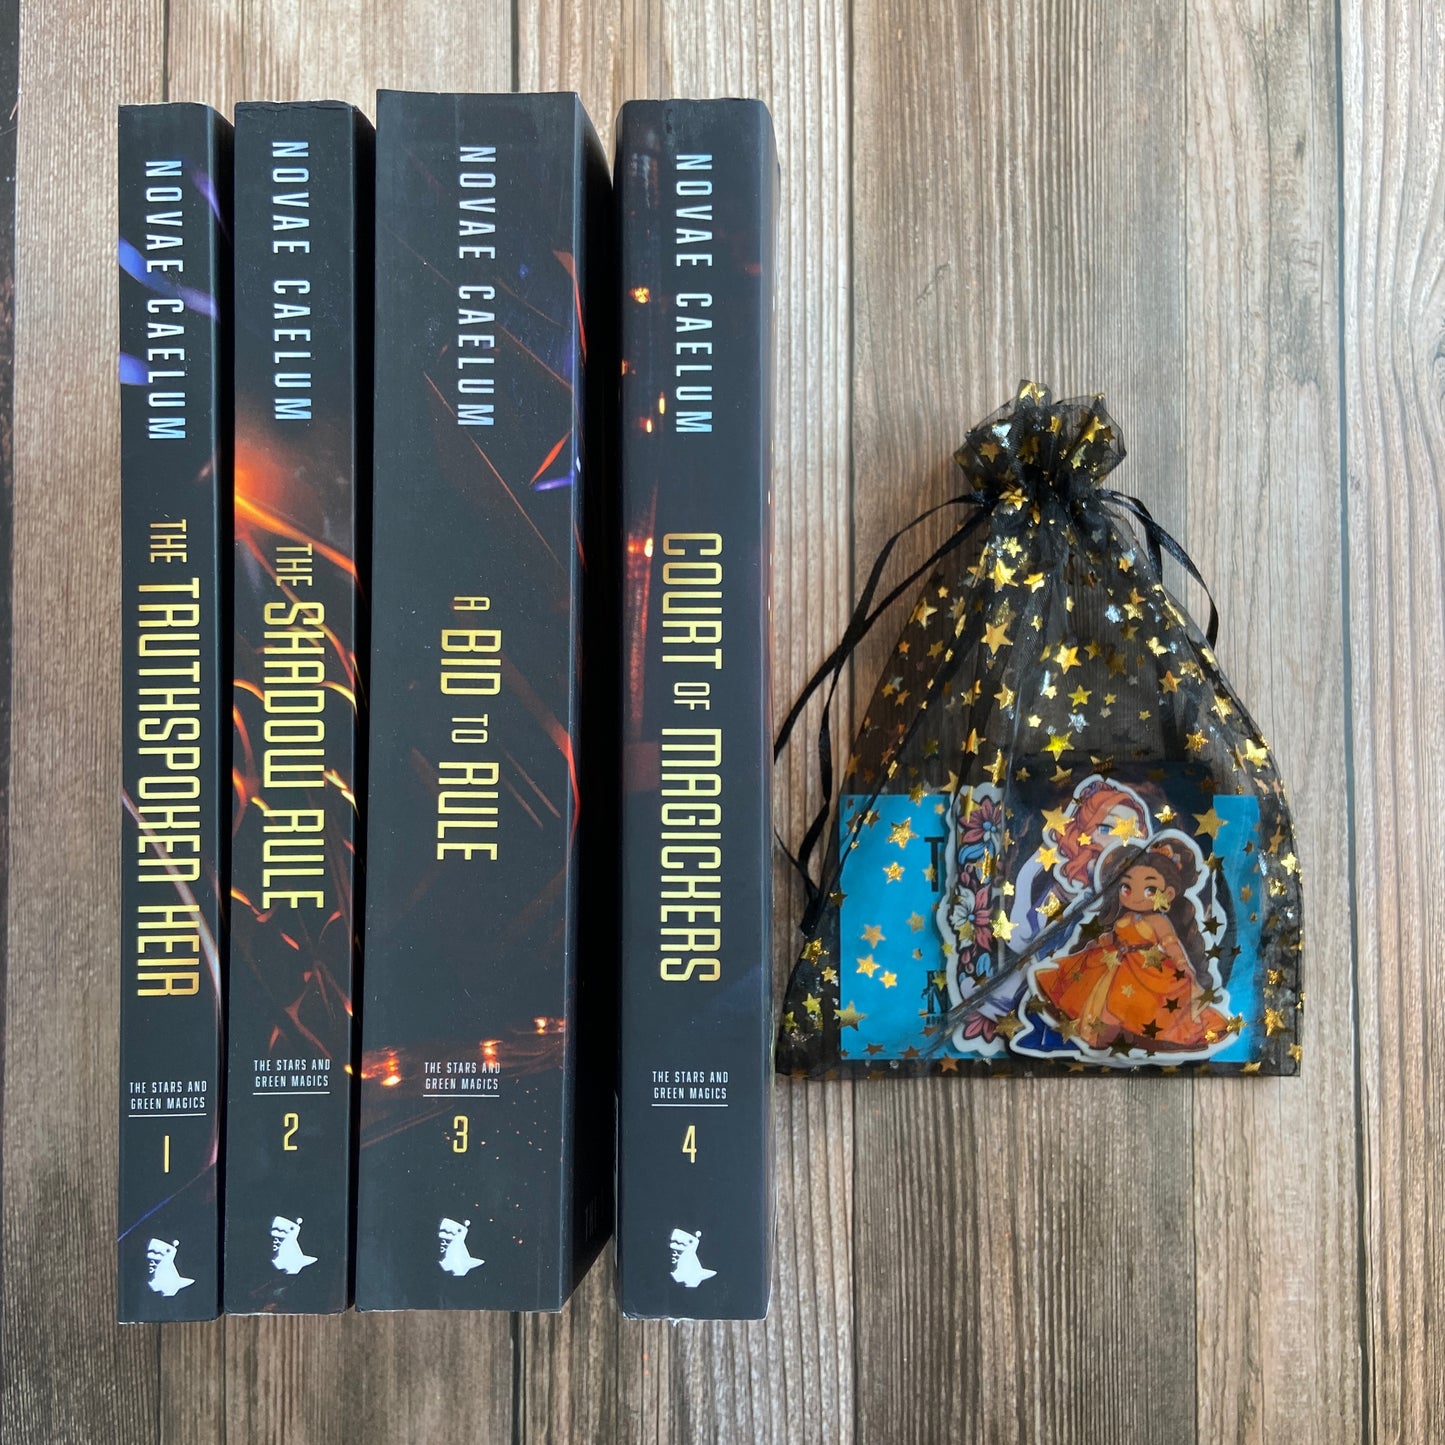 Bundle of 4 paperbacks (Books 1-4) from "The Stars and Green Magics" series by Novae Caelum displaying the spines, along with a black, starry mesh gift bag filled with a variety of series-related stickers. This bundle is part of the "SCRATCH AND DENT - SIGNED" collection.